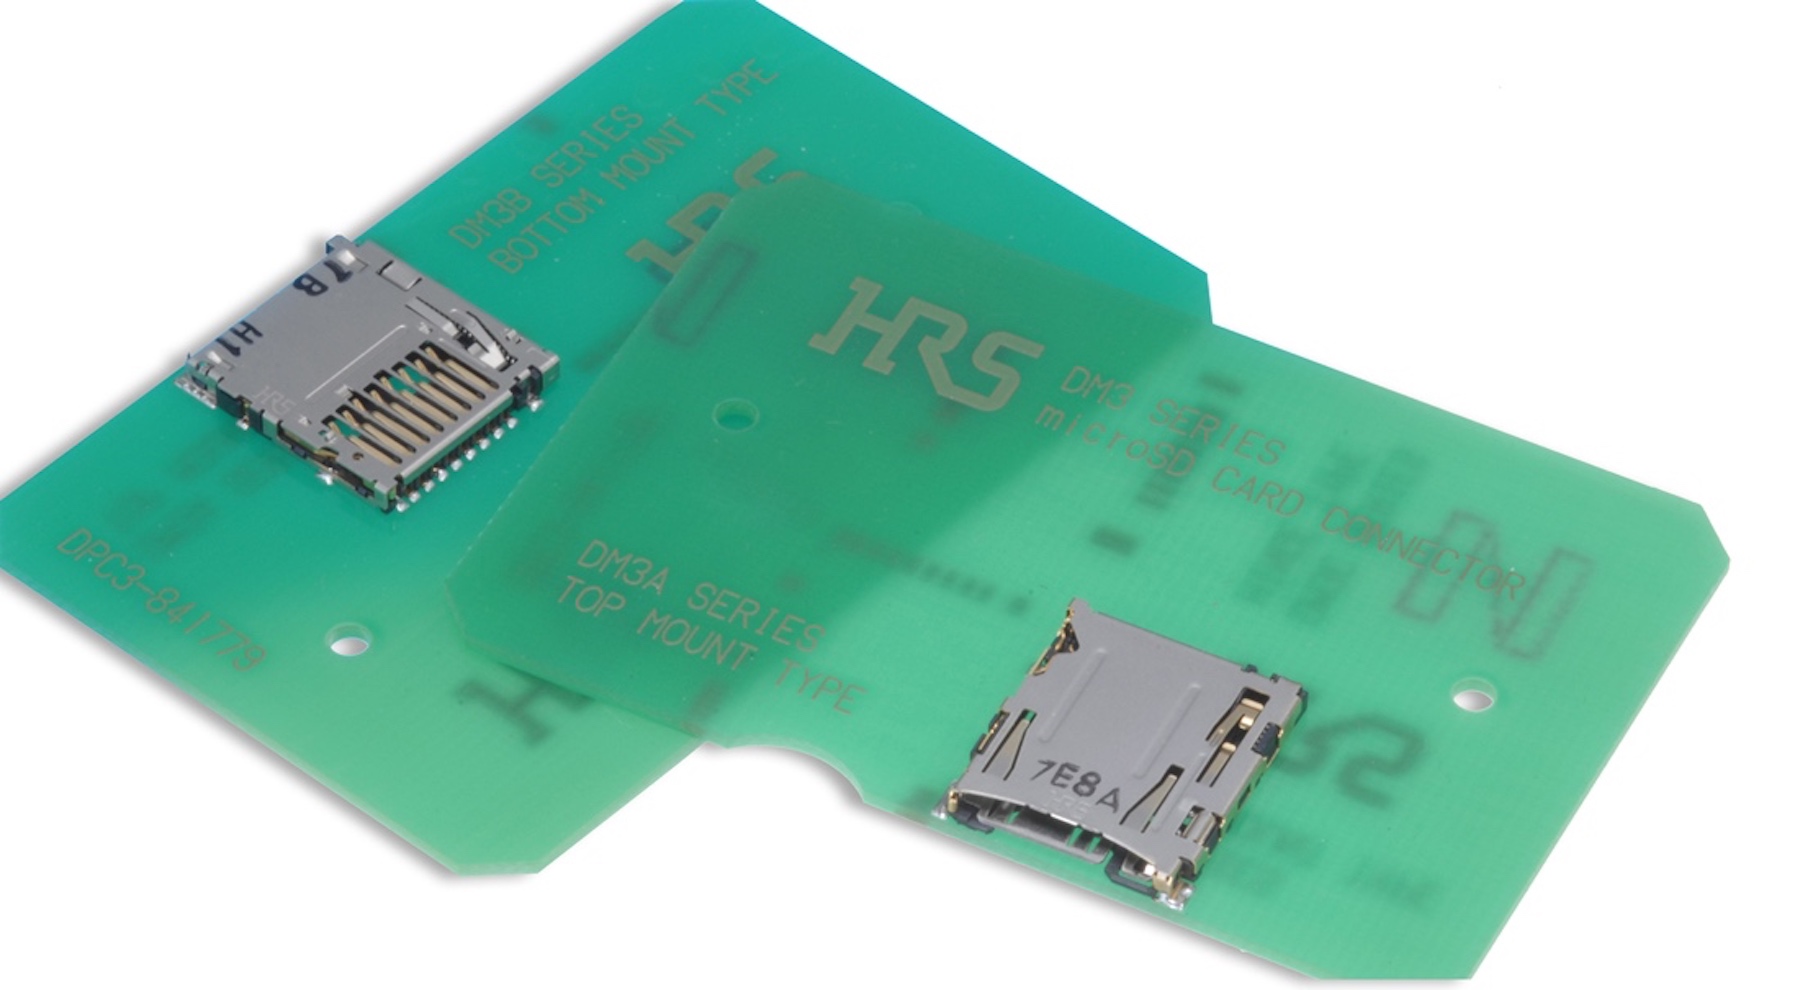 Hirose Launches Lowest-Profile Push-Push MicroSD Connector